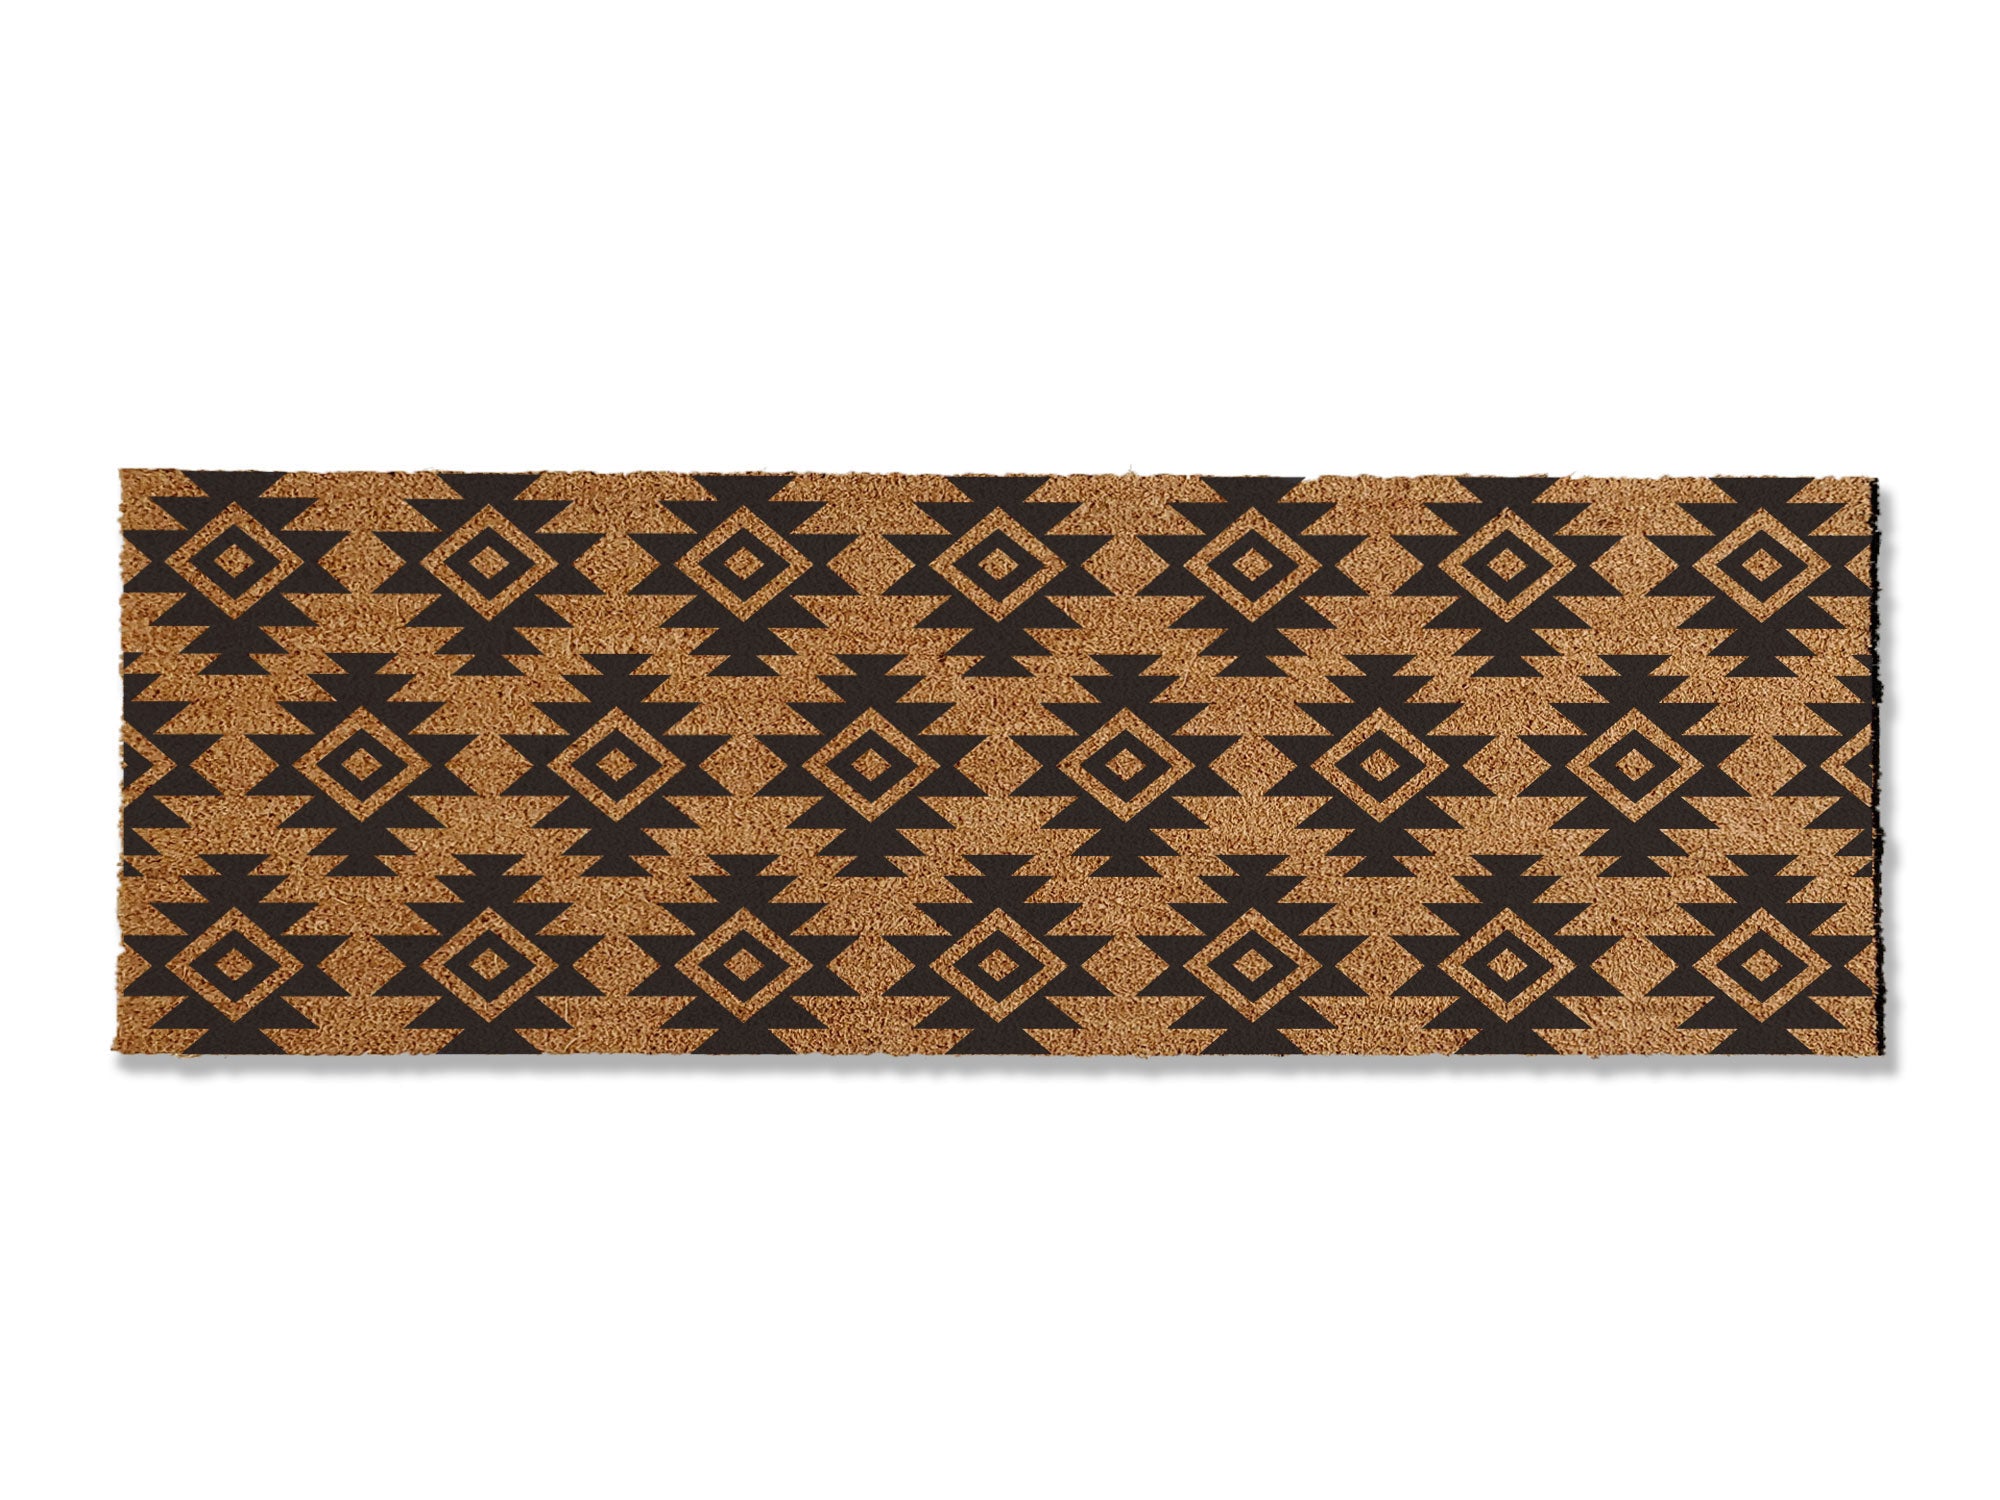 A coir doormat that is 24 inches by 72 inches and has a geometric aztec print painted on it.